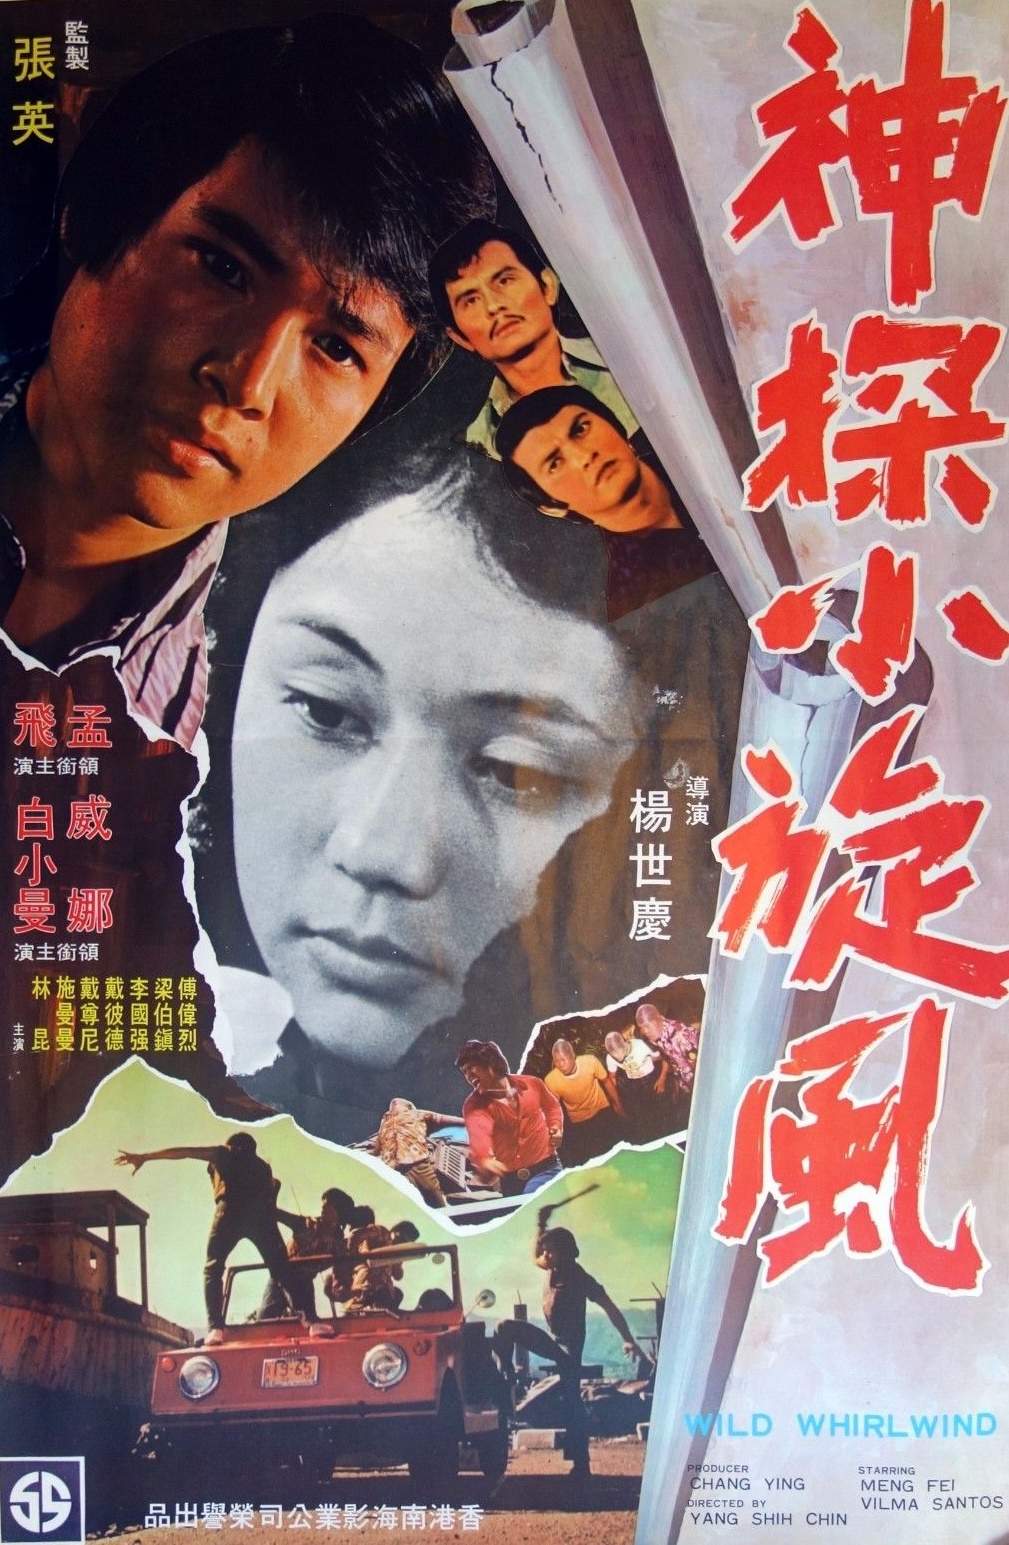 Twin Fist for Justice (1974) Screenshot 1 